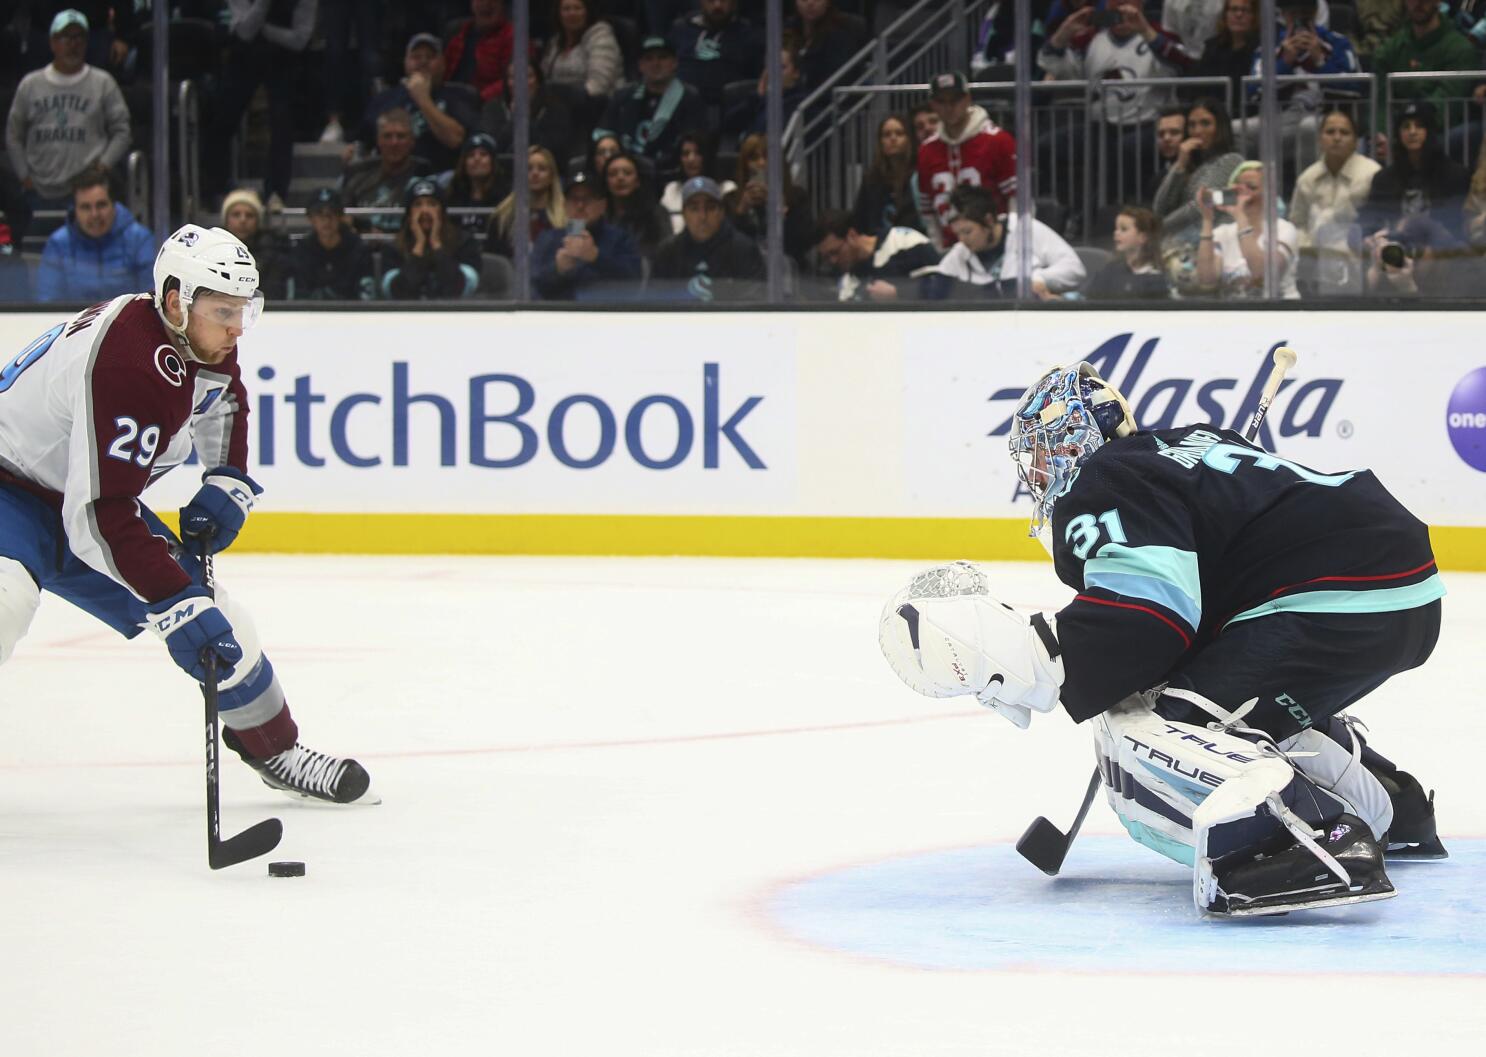 Avalanche loses to Pittsburgh 2-1 in overtime loss